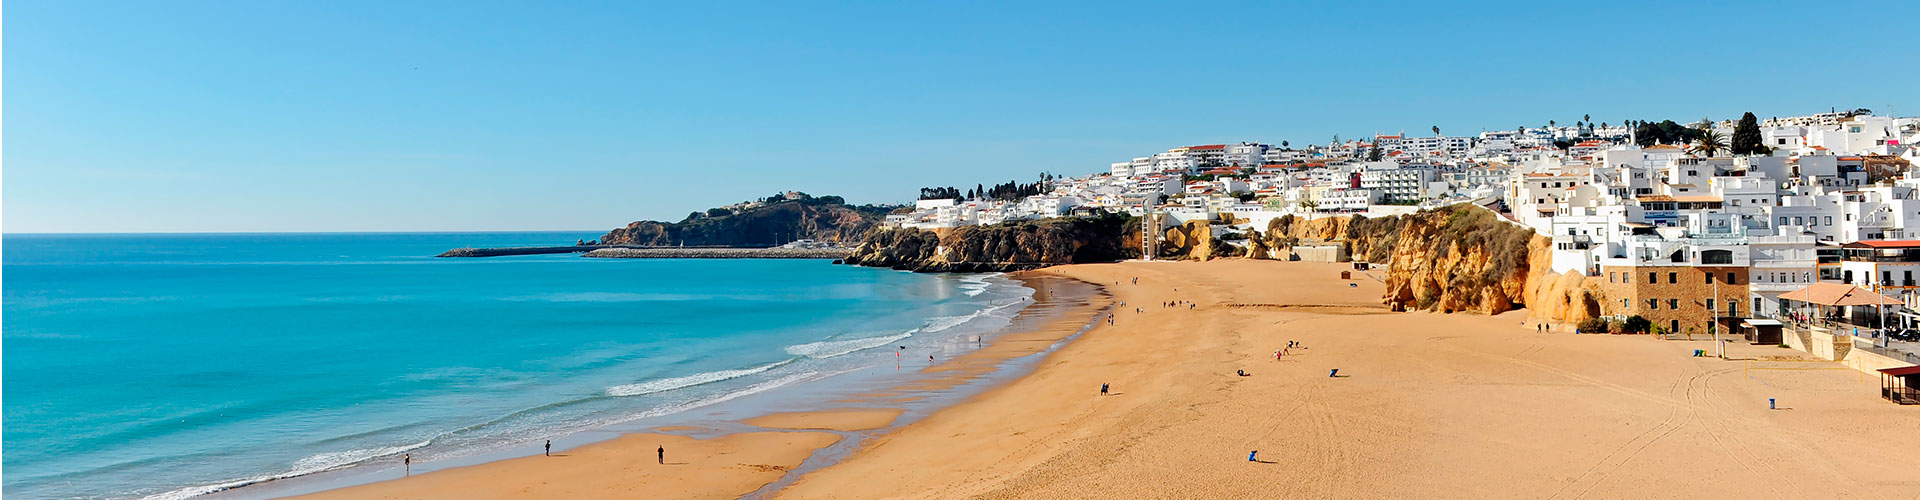 The progress has turned Albufeira into a city with tourism and leisure as its vocation but the streets in the hold Cerro da Vila (mediaeval area) still preserve the picturesque appeal of whitewashed houses and steeply narrow streets.